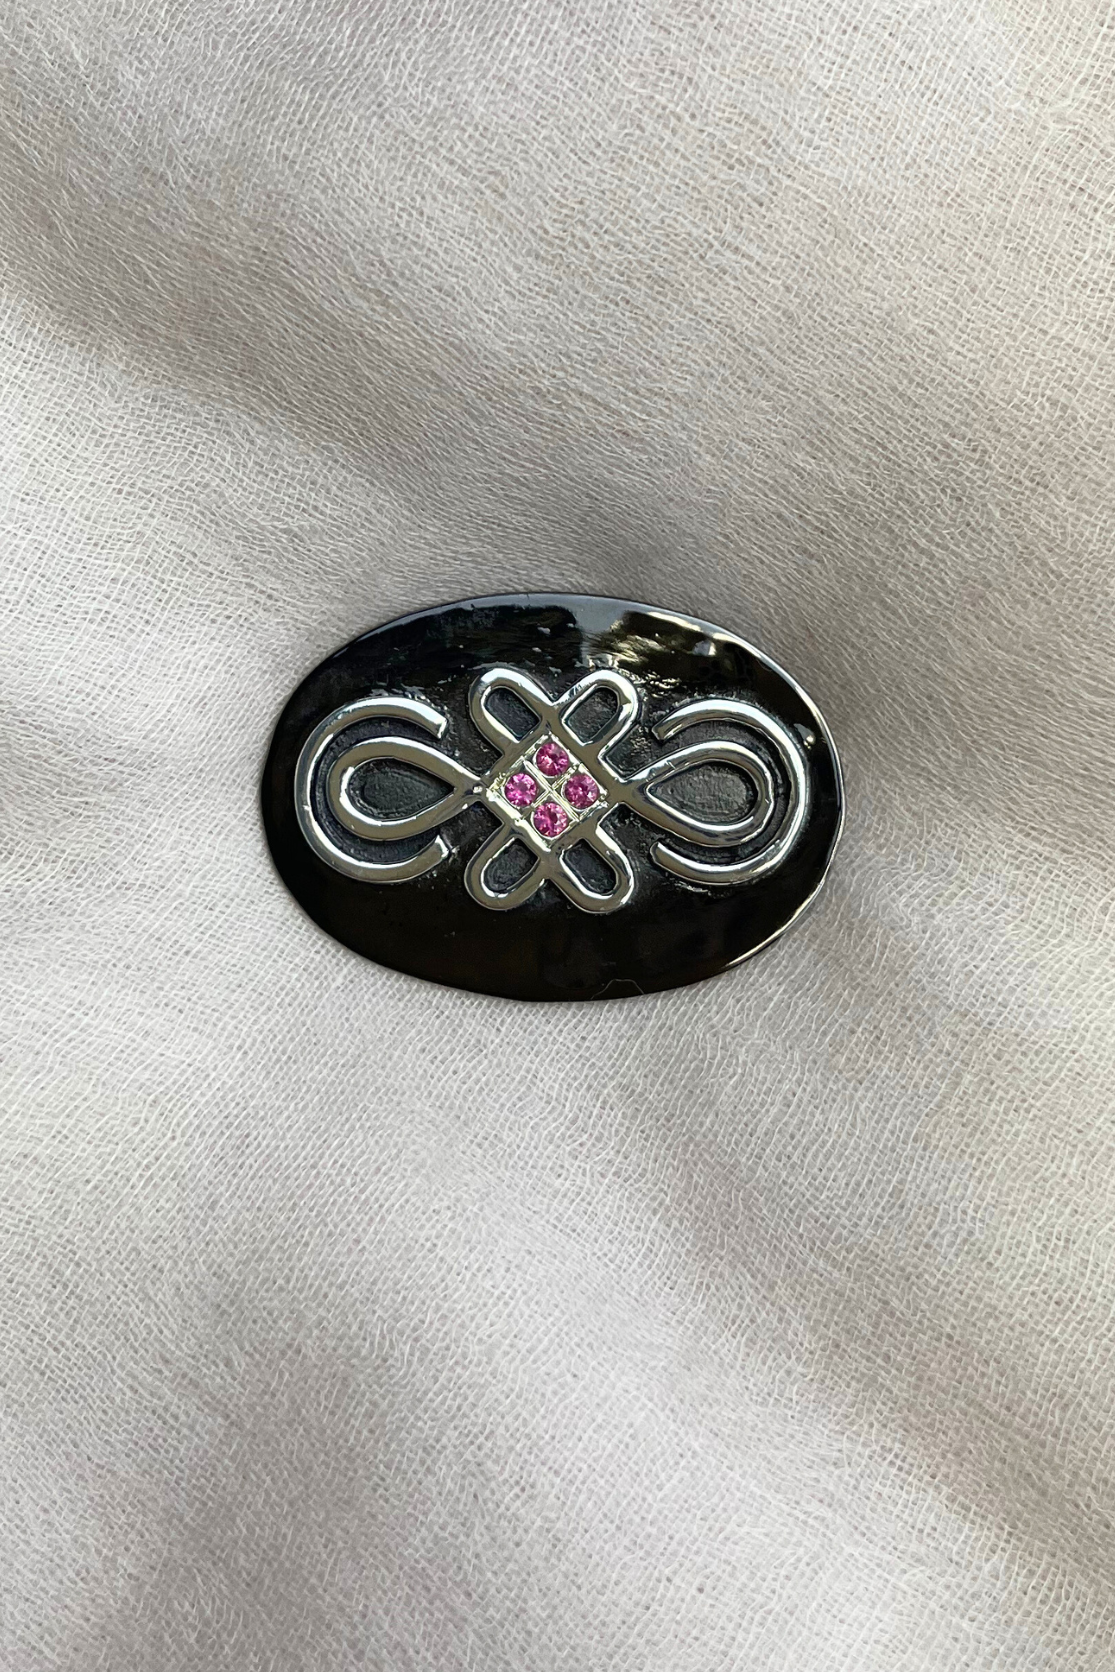 Cara Celtic Silver Ruby Magnet Brooch - Cara Cashmere